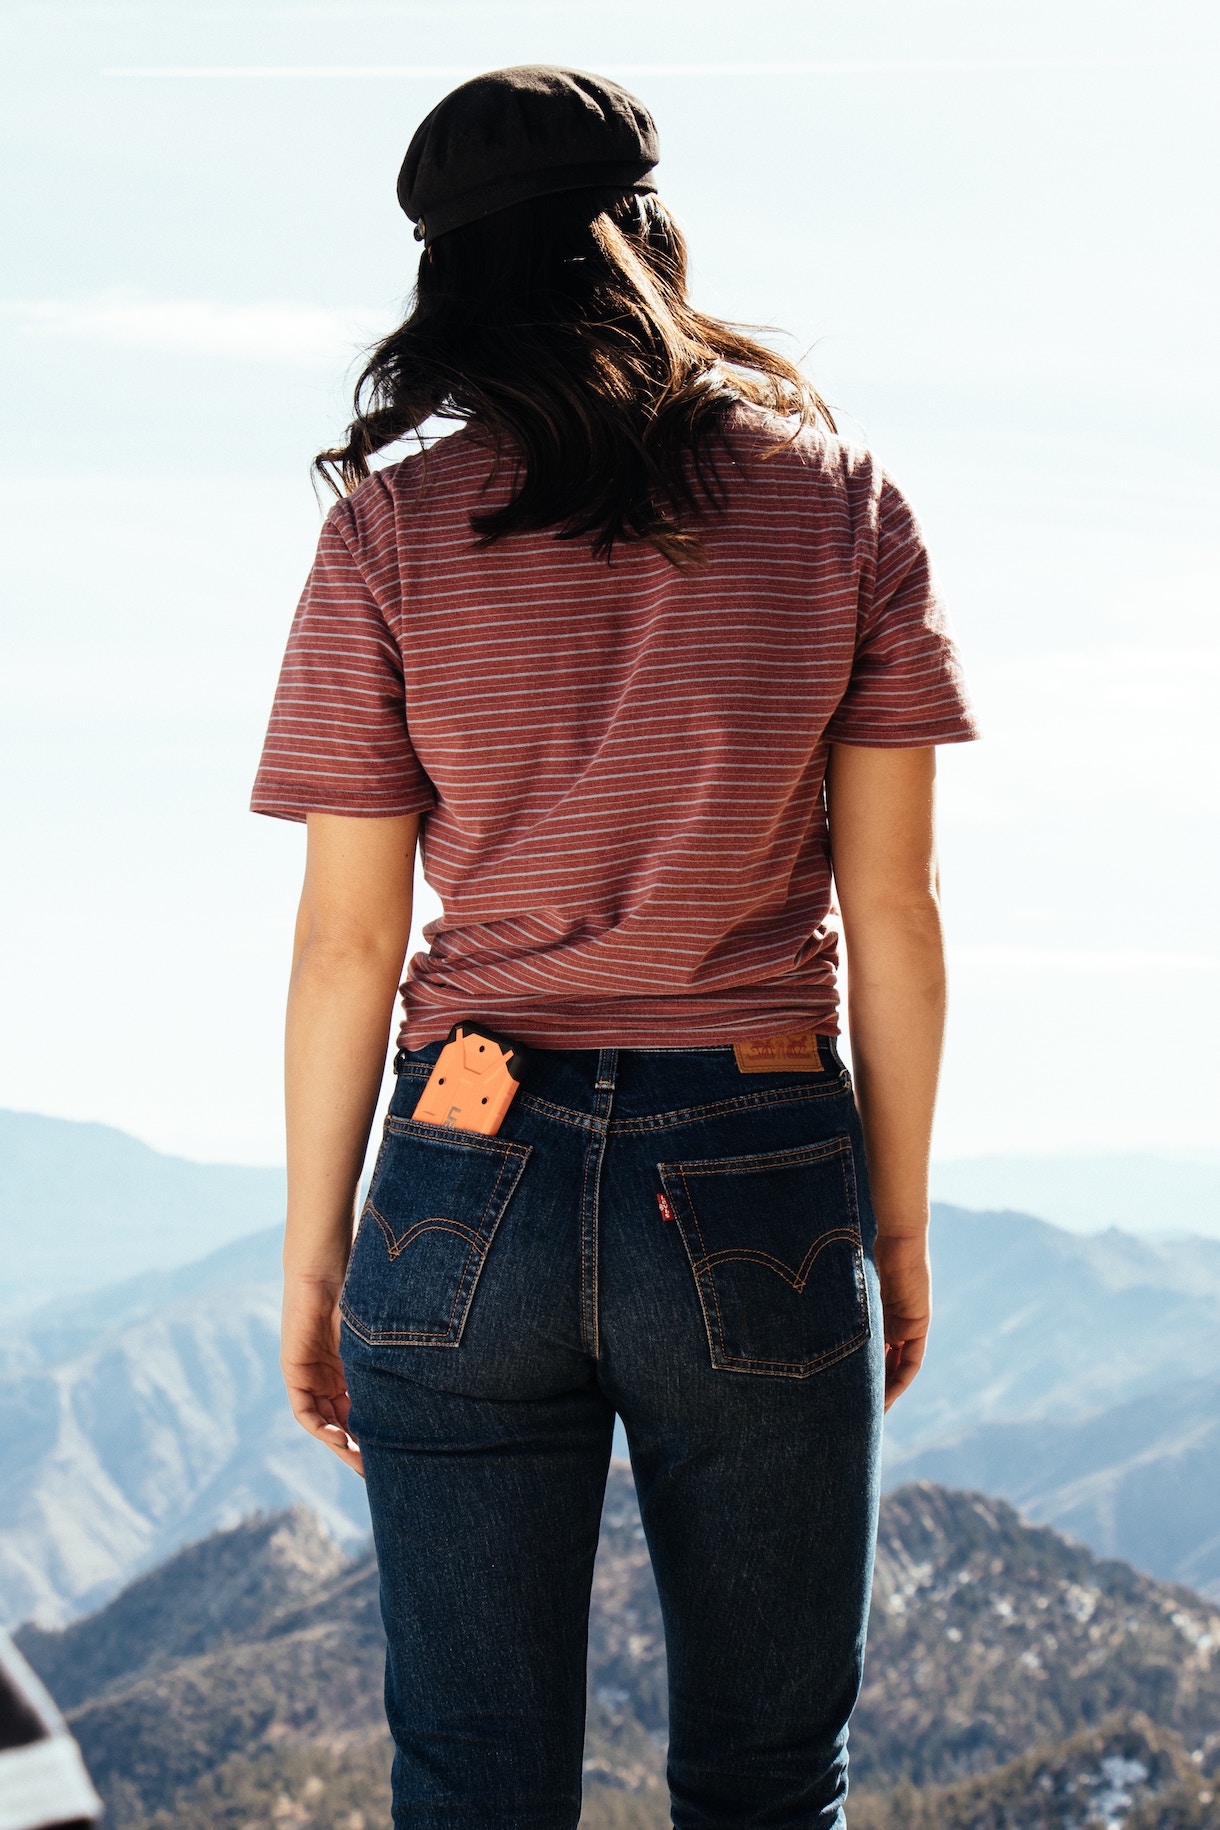 iPhone sticking half way out of back pocket of jeans, while woman looks at mountains in distance